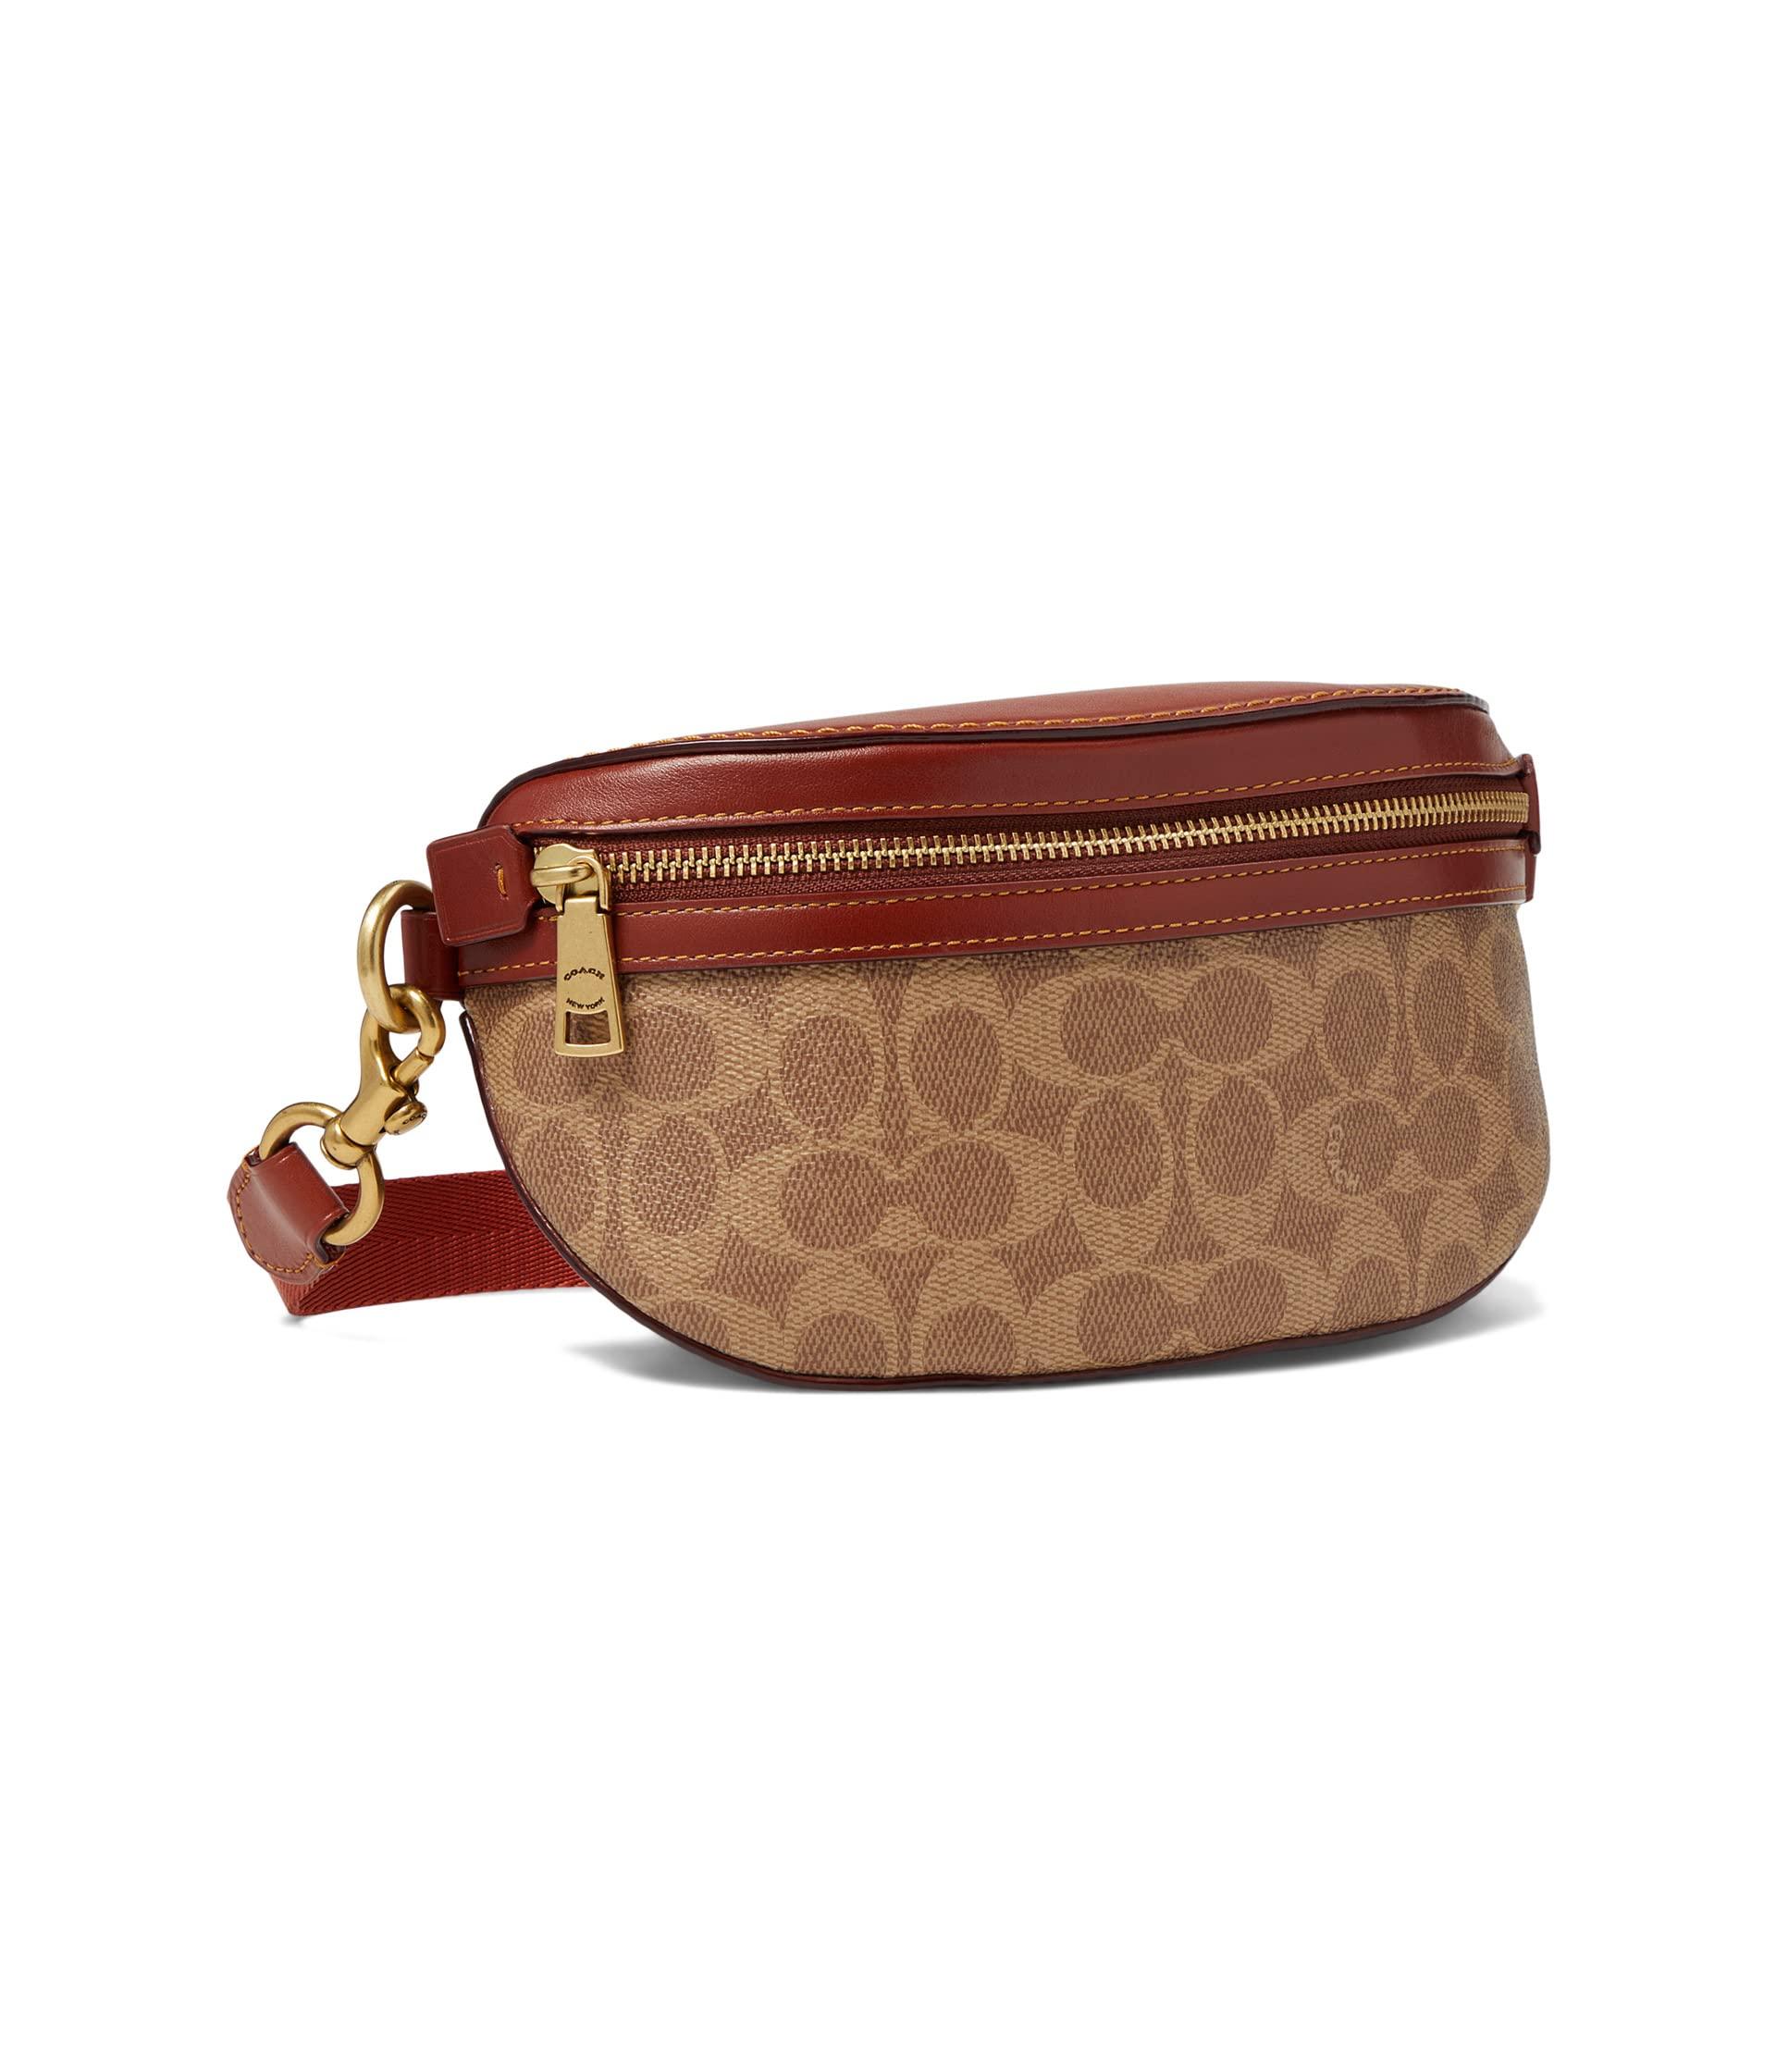 COACH Coated Canvas Signature Bethany Belt Bag in Brown